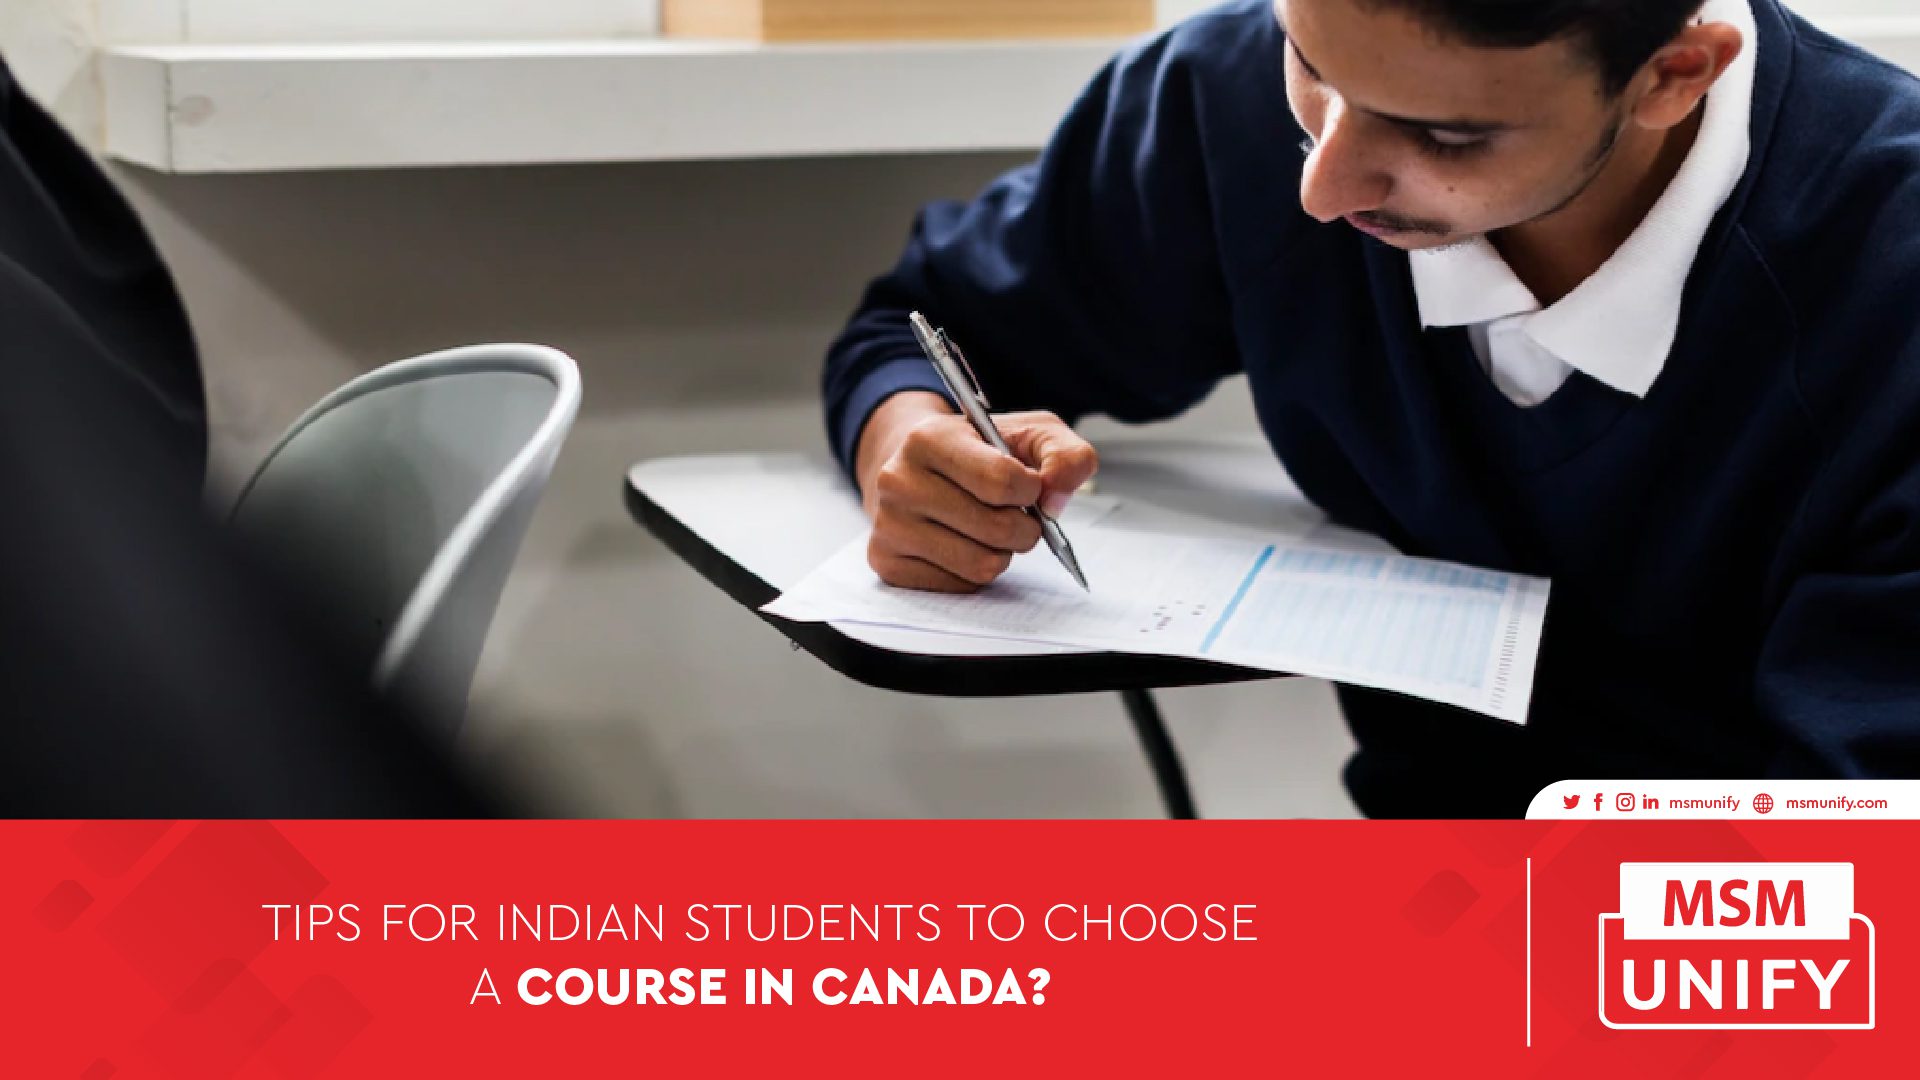 MSM Unify Tips for Indian Students to choose a course in Canada